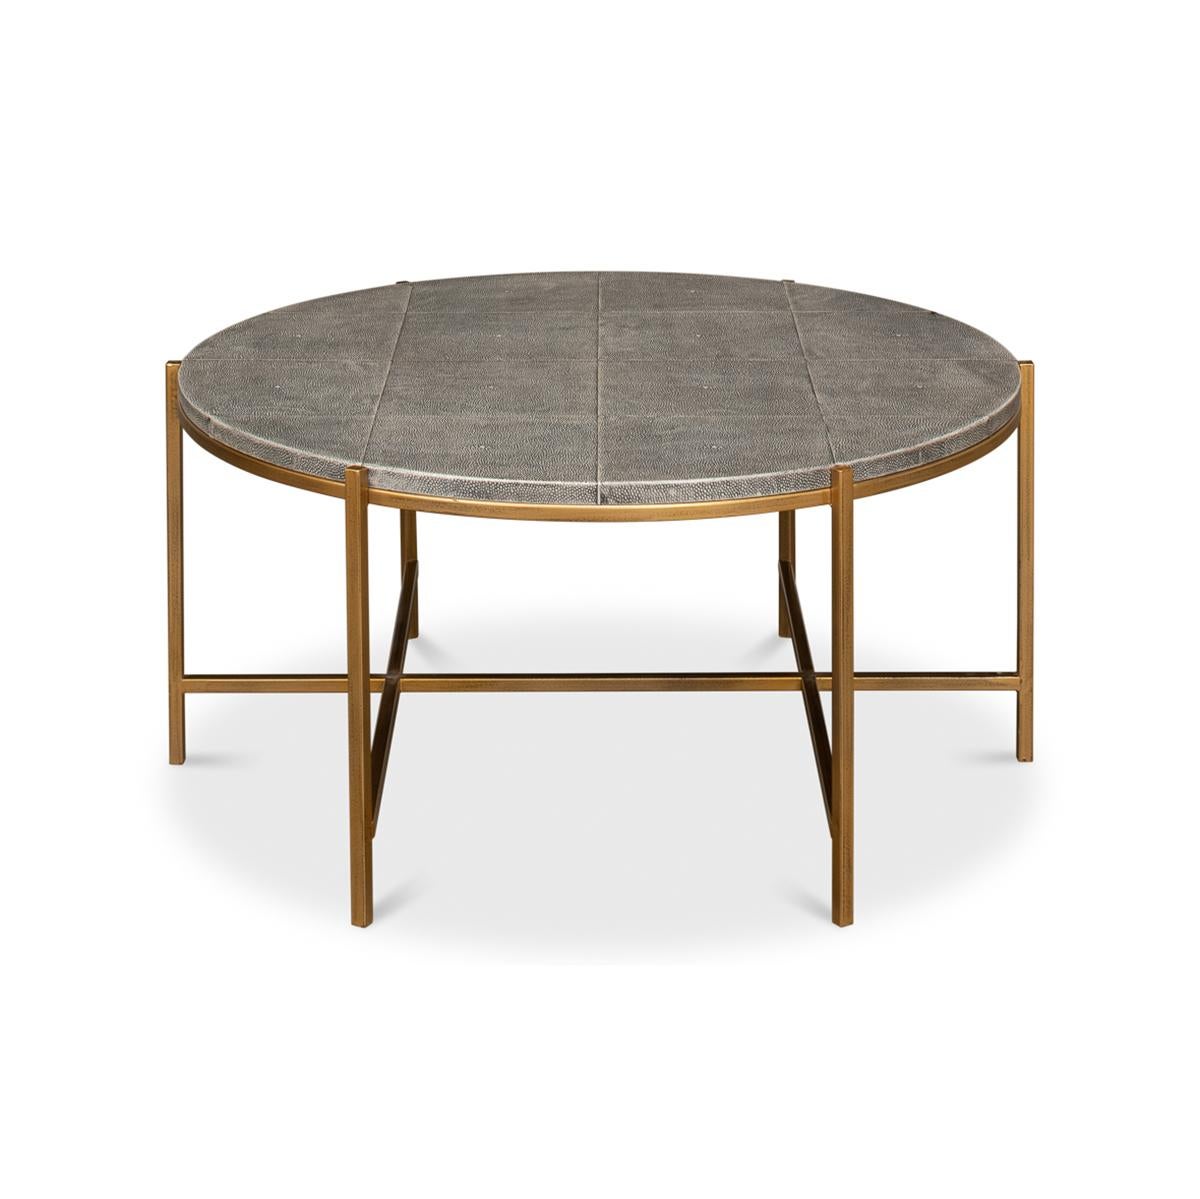 Mid century Round leather cocktail table with a shagreen embossed leather top in a geometric grid form above a gilded iron base with stretchers.

Dimensions: 34